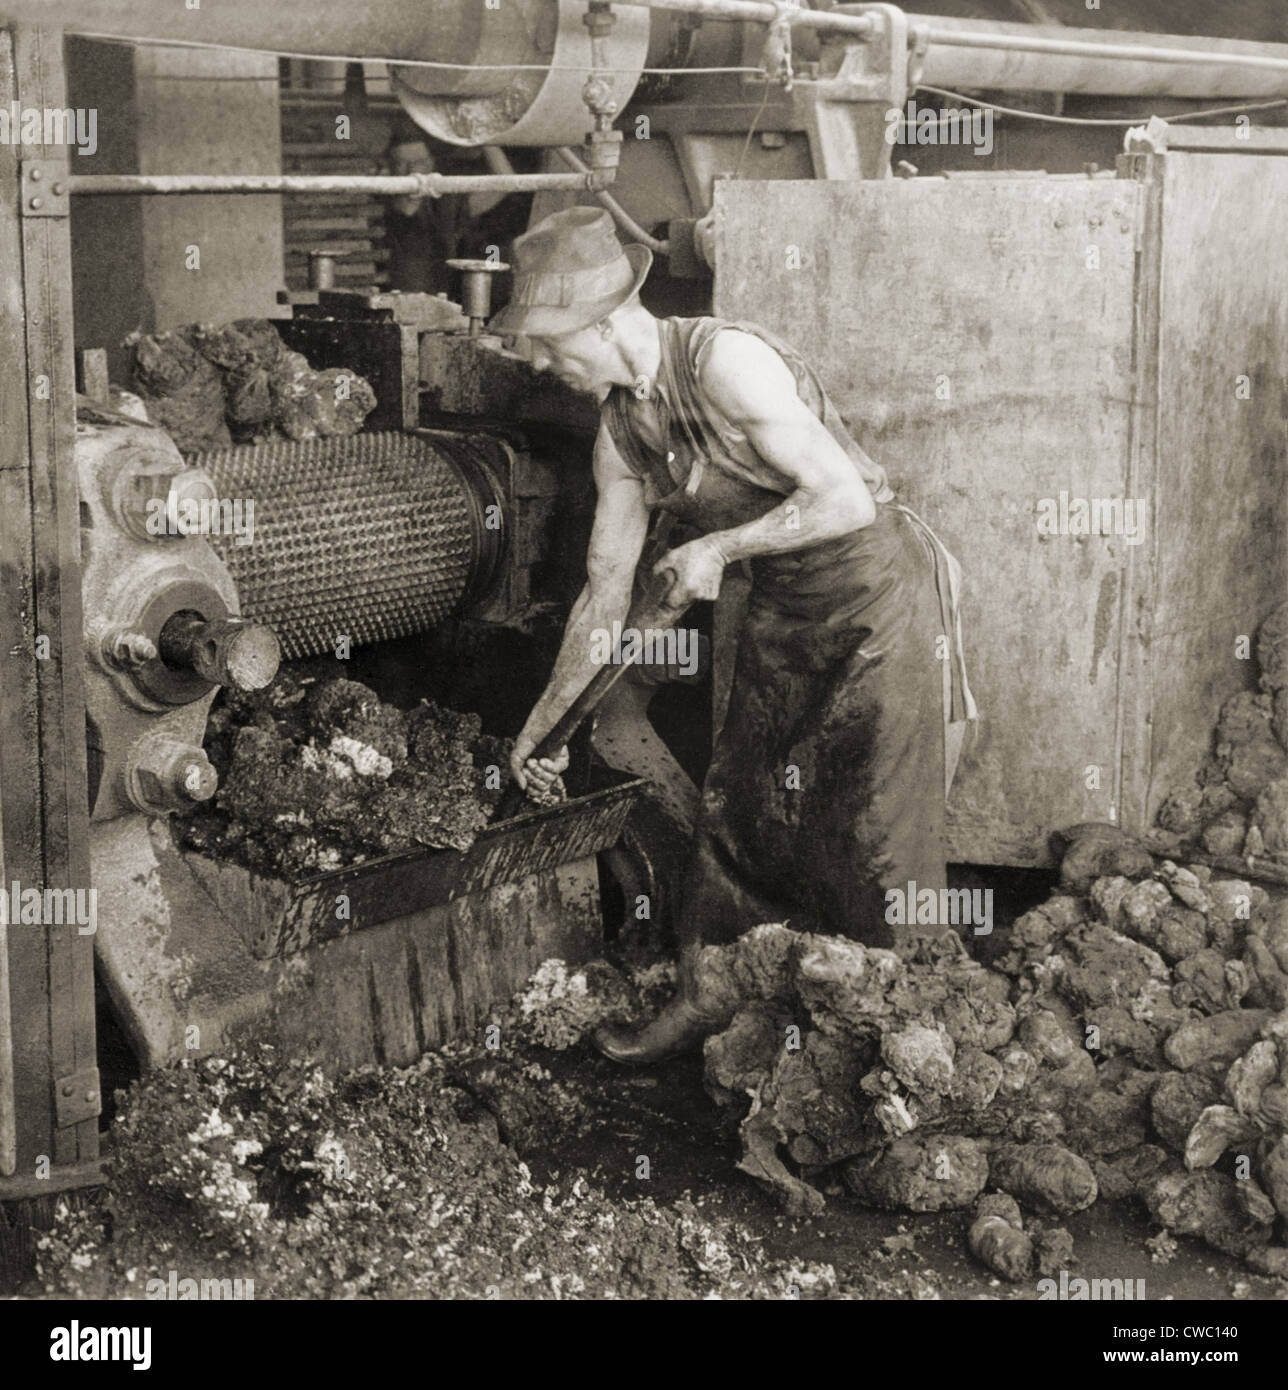 Crude rubber from Brazil in a rubber cracking machine, Goodyear Tire Factory, Akron, Ohio. 1928. Stock Photo